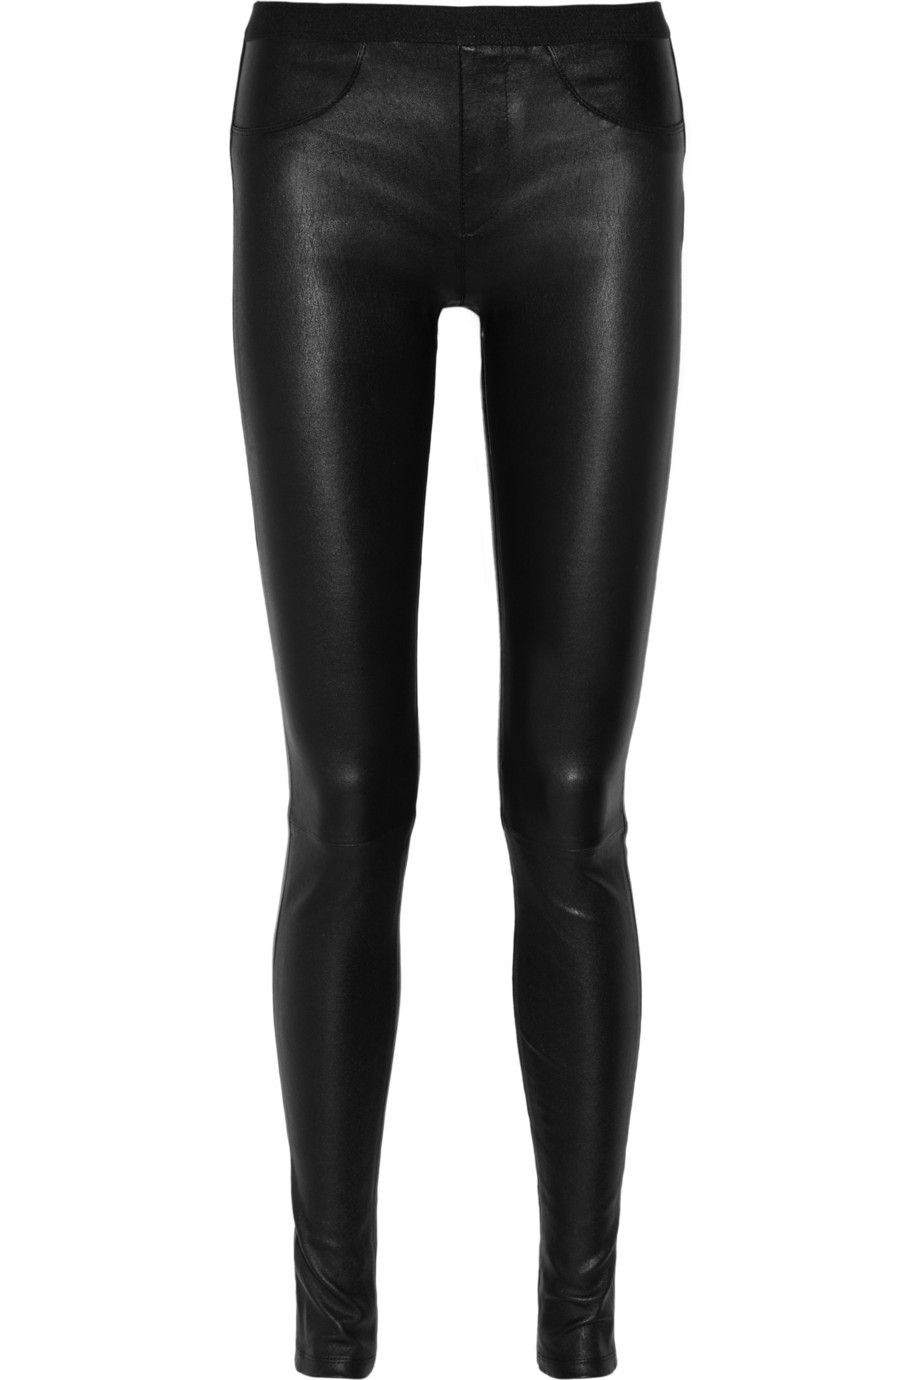 Human leg, Textile, Joint, Standing, Waist, Black, Thigh, Tights, Pocket, Leather, 